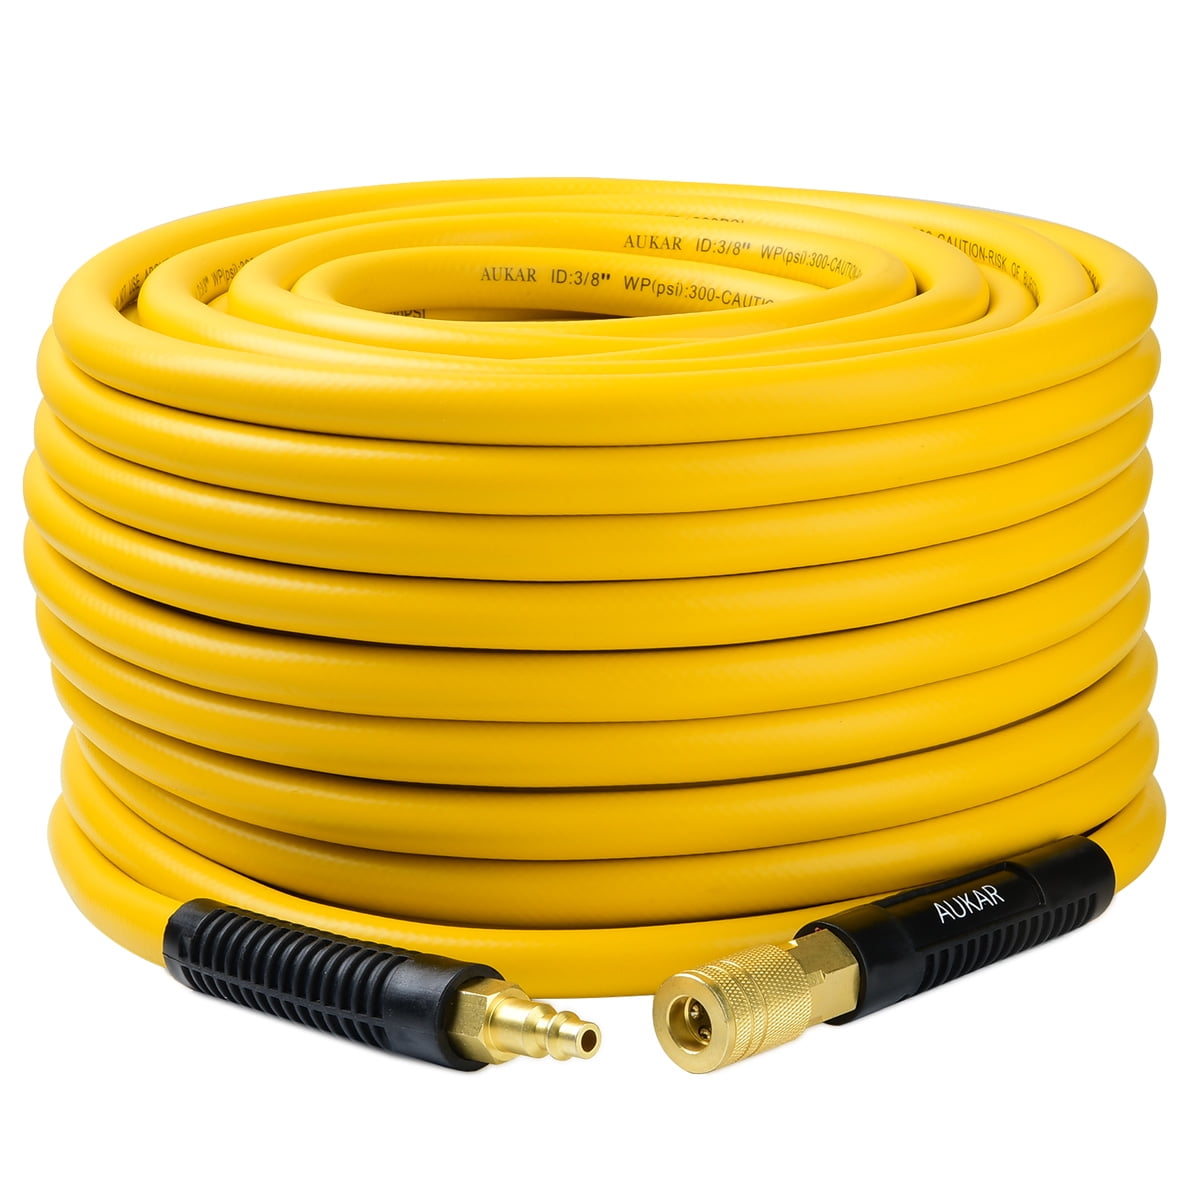 AUKAR Air Hose - 3/8 Inch by 100 Feet Hybrid Air Compressor Hose, 300 PSI  Heavy Duty, Lightweight, All-Weather Flexibility, Kink Resistant, with 1/4  Inch Solid Quick Brass Fittings, Bend Restrictors 